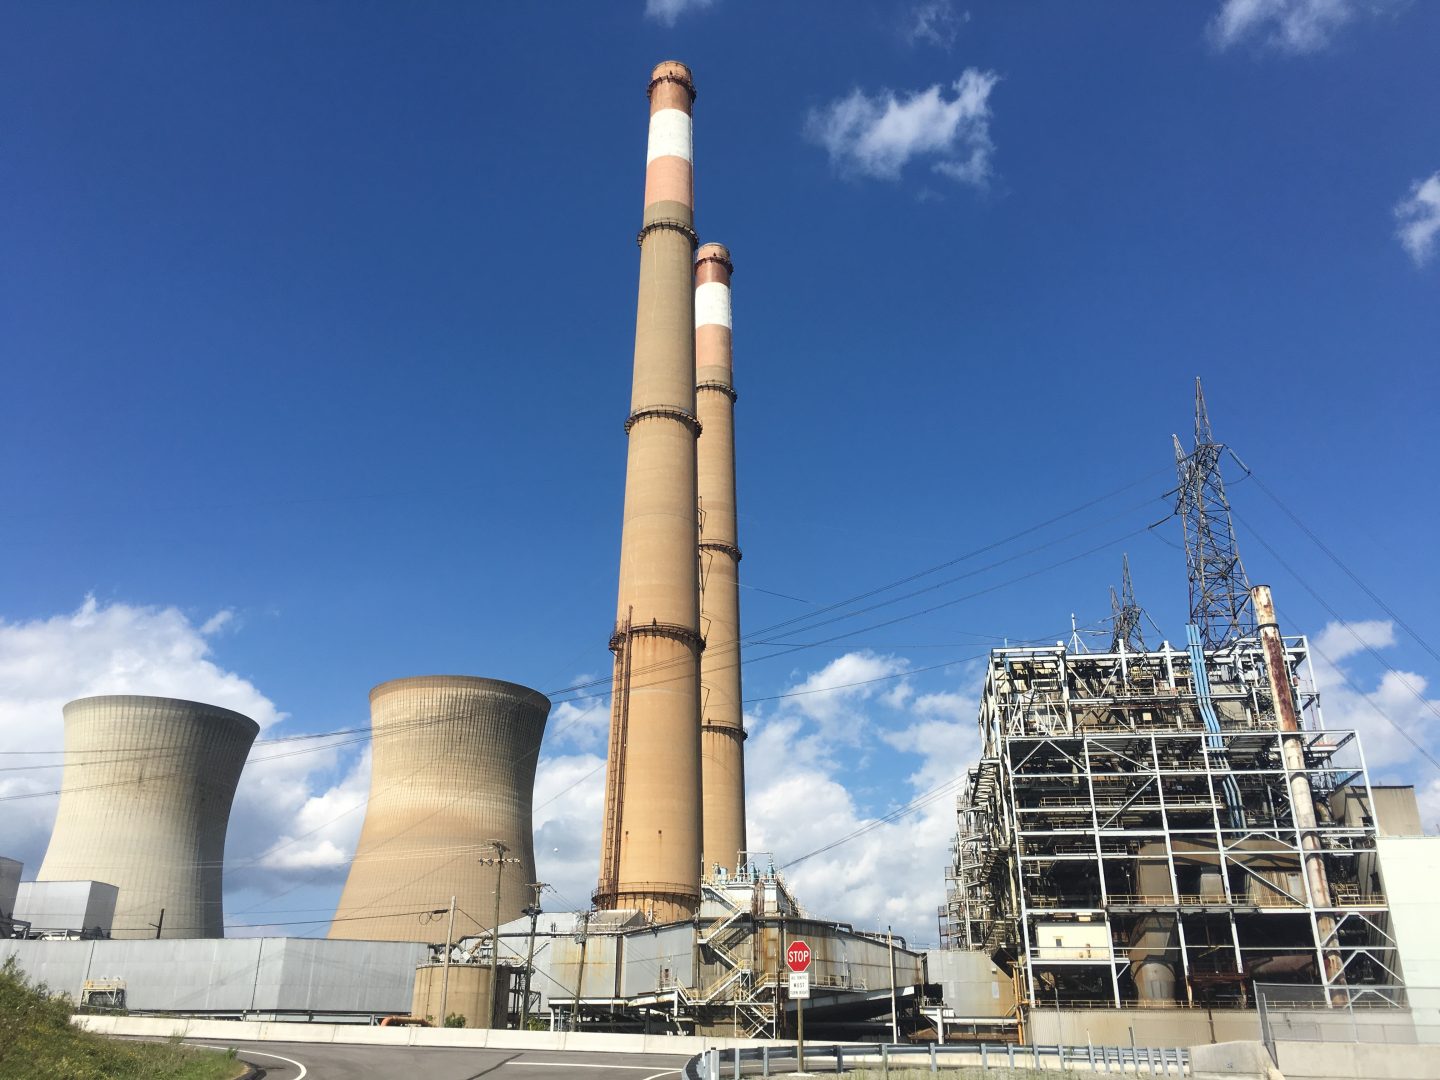 FirstEnergy's Hatfield Ferry coal plant in Greene County closed in 2013 amid poor market conditions, helping Pennsylvania to meet its emissions targets under the federal Clean Power Plan.